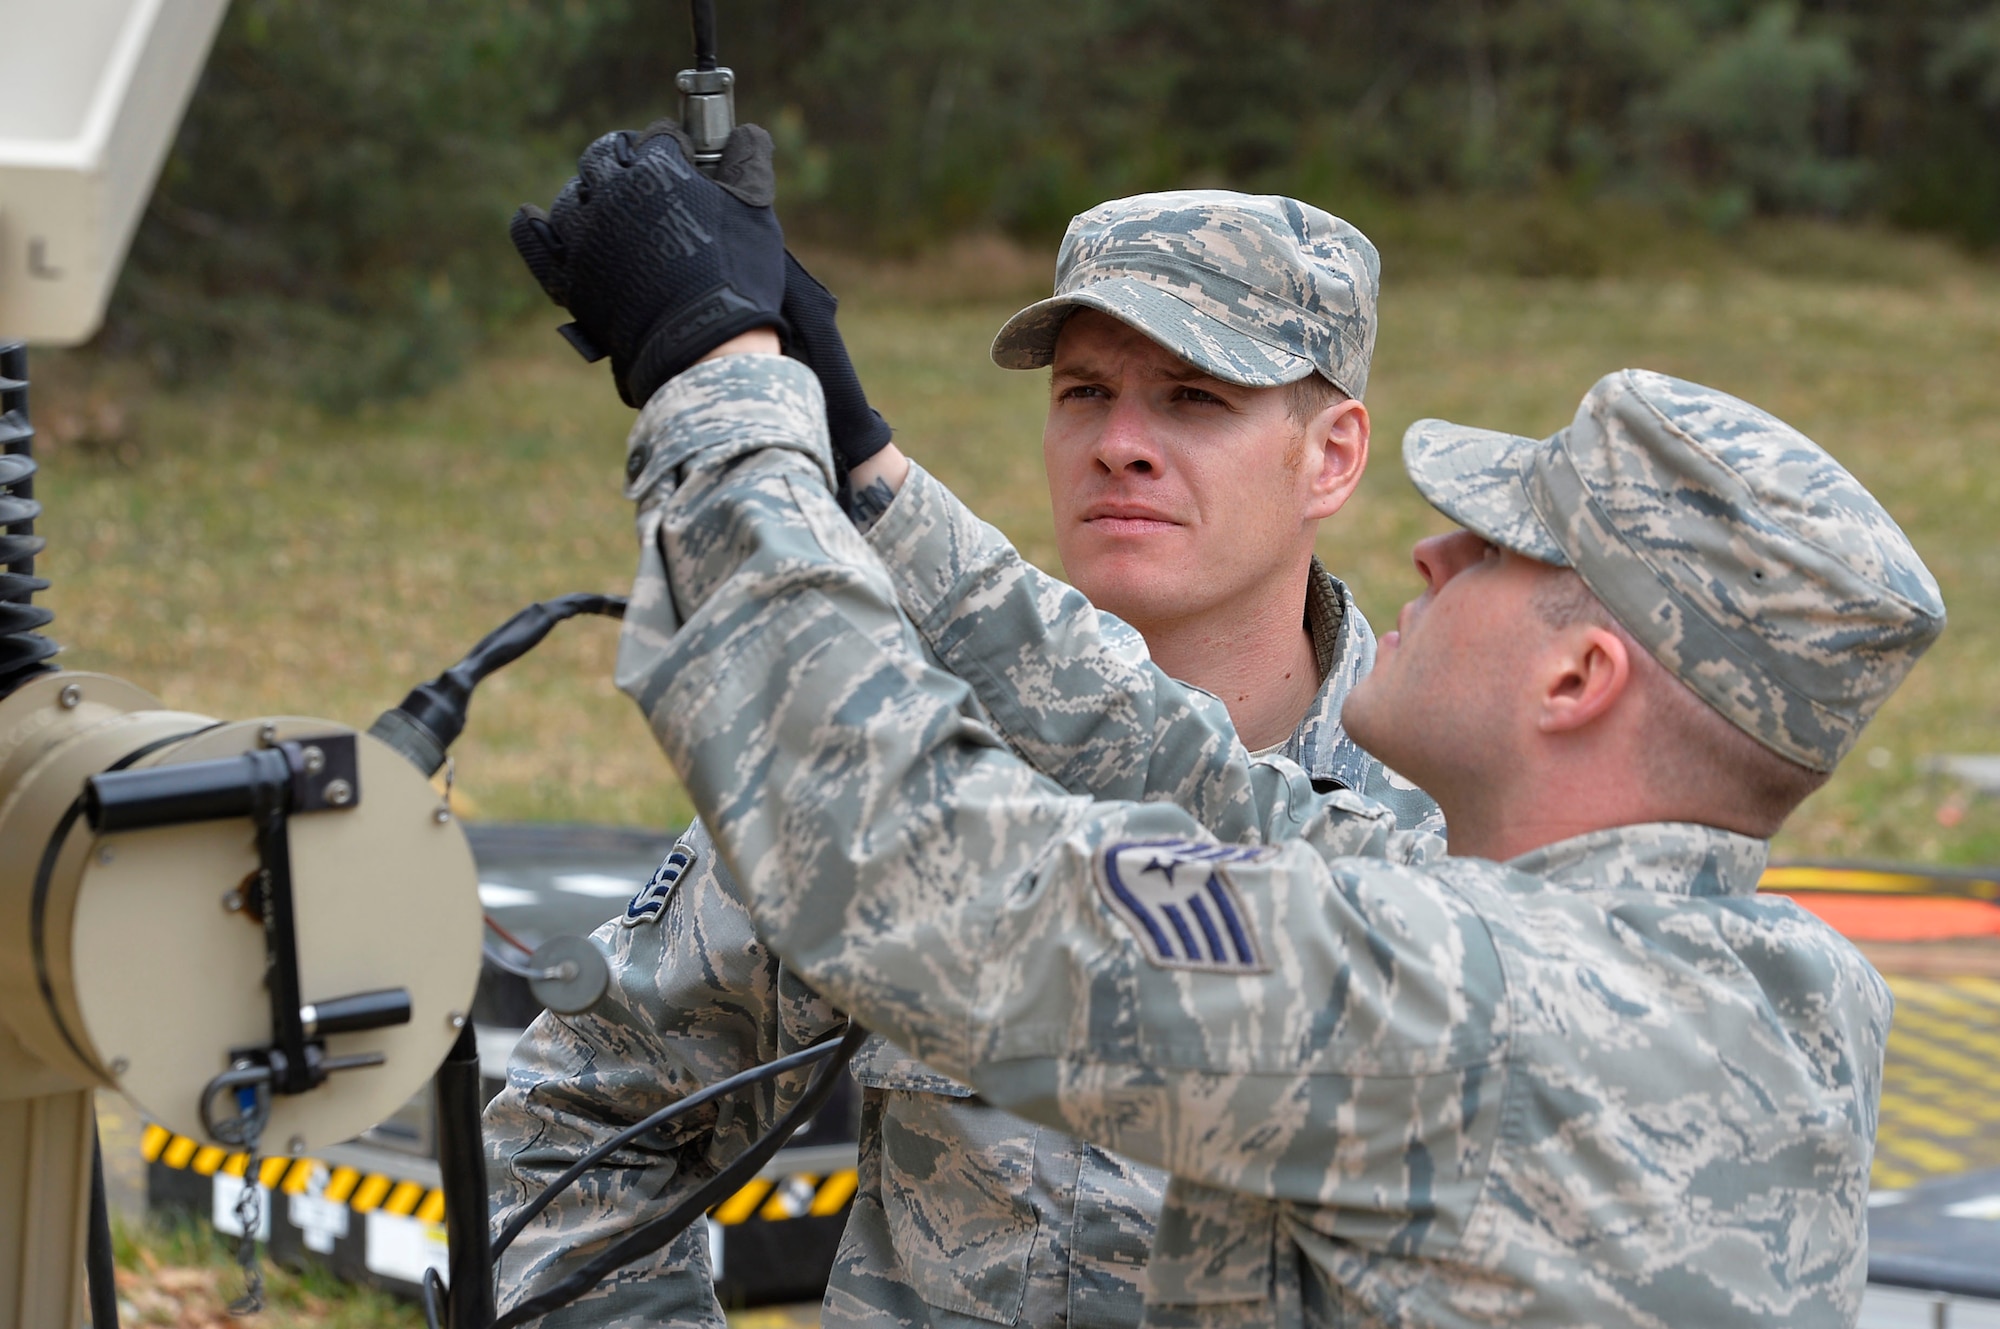 Staff Sgt. Joshua Miles, 1st Combat Communications Squadron radio frequency transmissions technician, and Staff Sgt. Jason Renfroe, 263rd CBCS client systems technician, work on a communications antenna during an exercise on Ramstein Air Base, Germany, April 26, 2017. The exercise featured the first total force integrated combat communications team for U.S. Air Forces in Europe and Air Forces Africa. (U.S. Air Force photo by Airman 1st Class Joshua Magbanua)